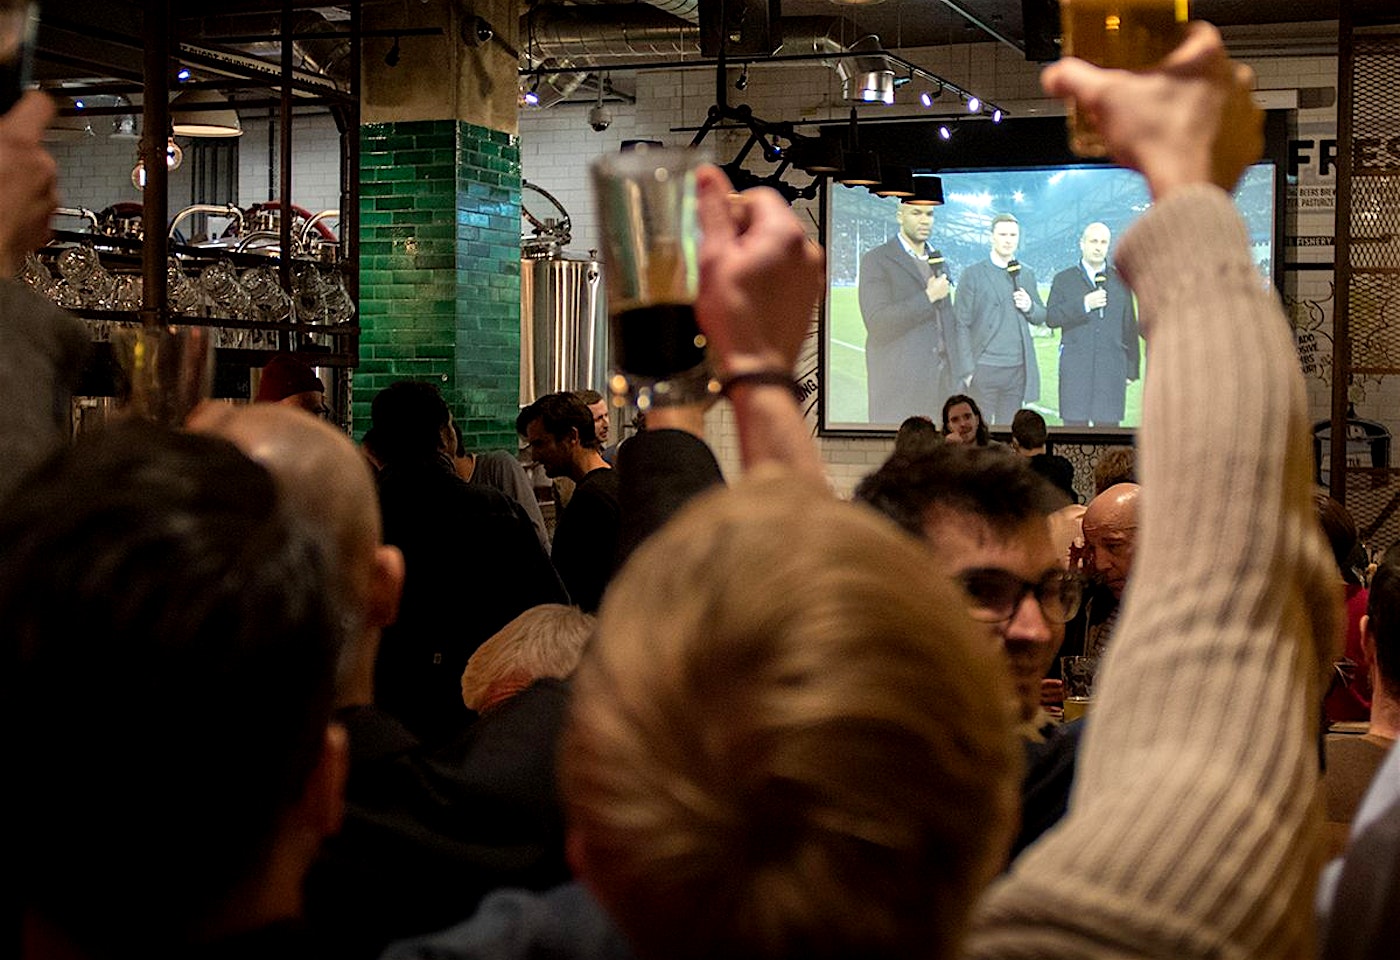 Crowds watching live sport at the Long Arm pub near Liverpool Street Station, east London